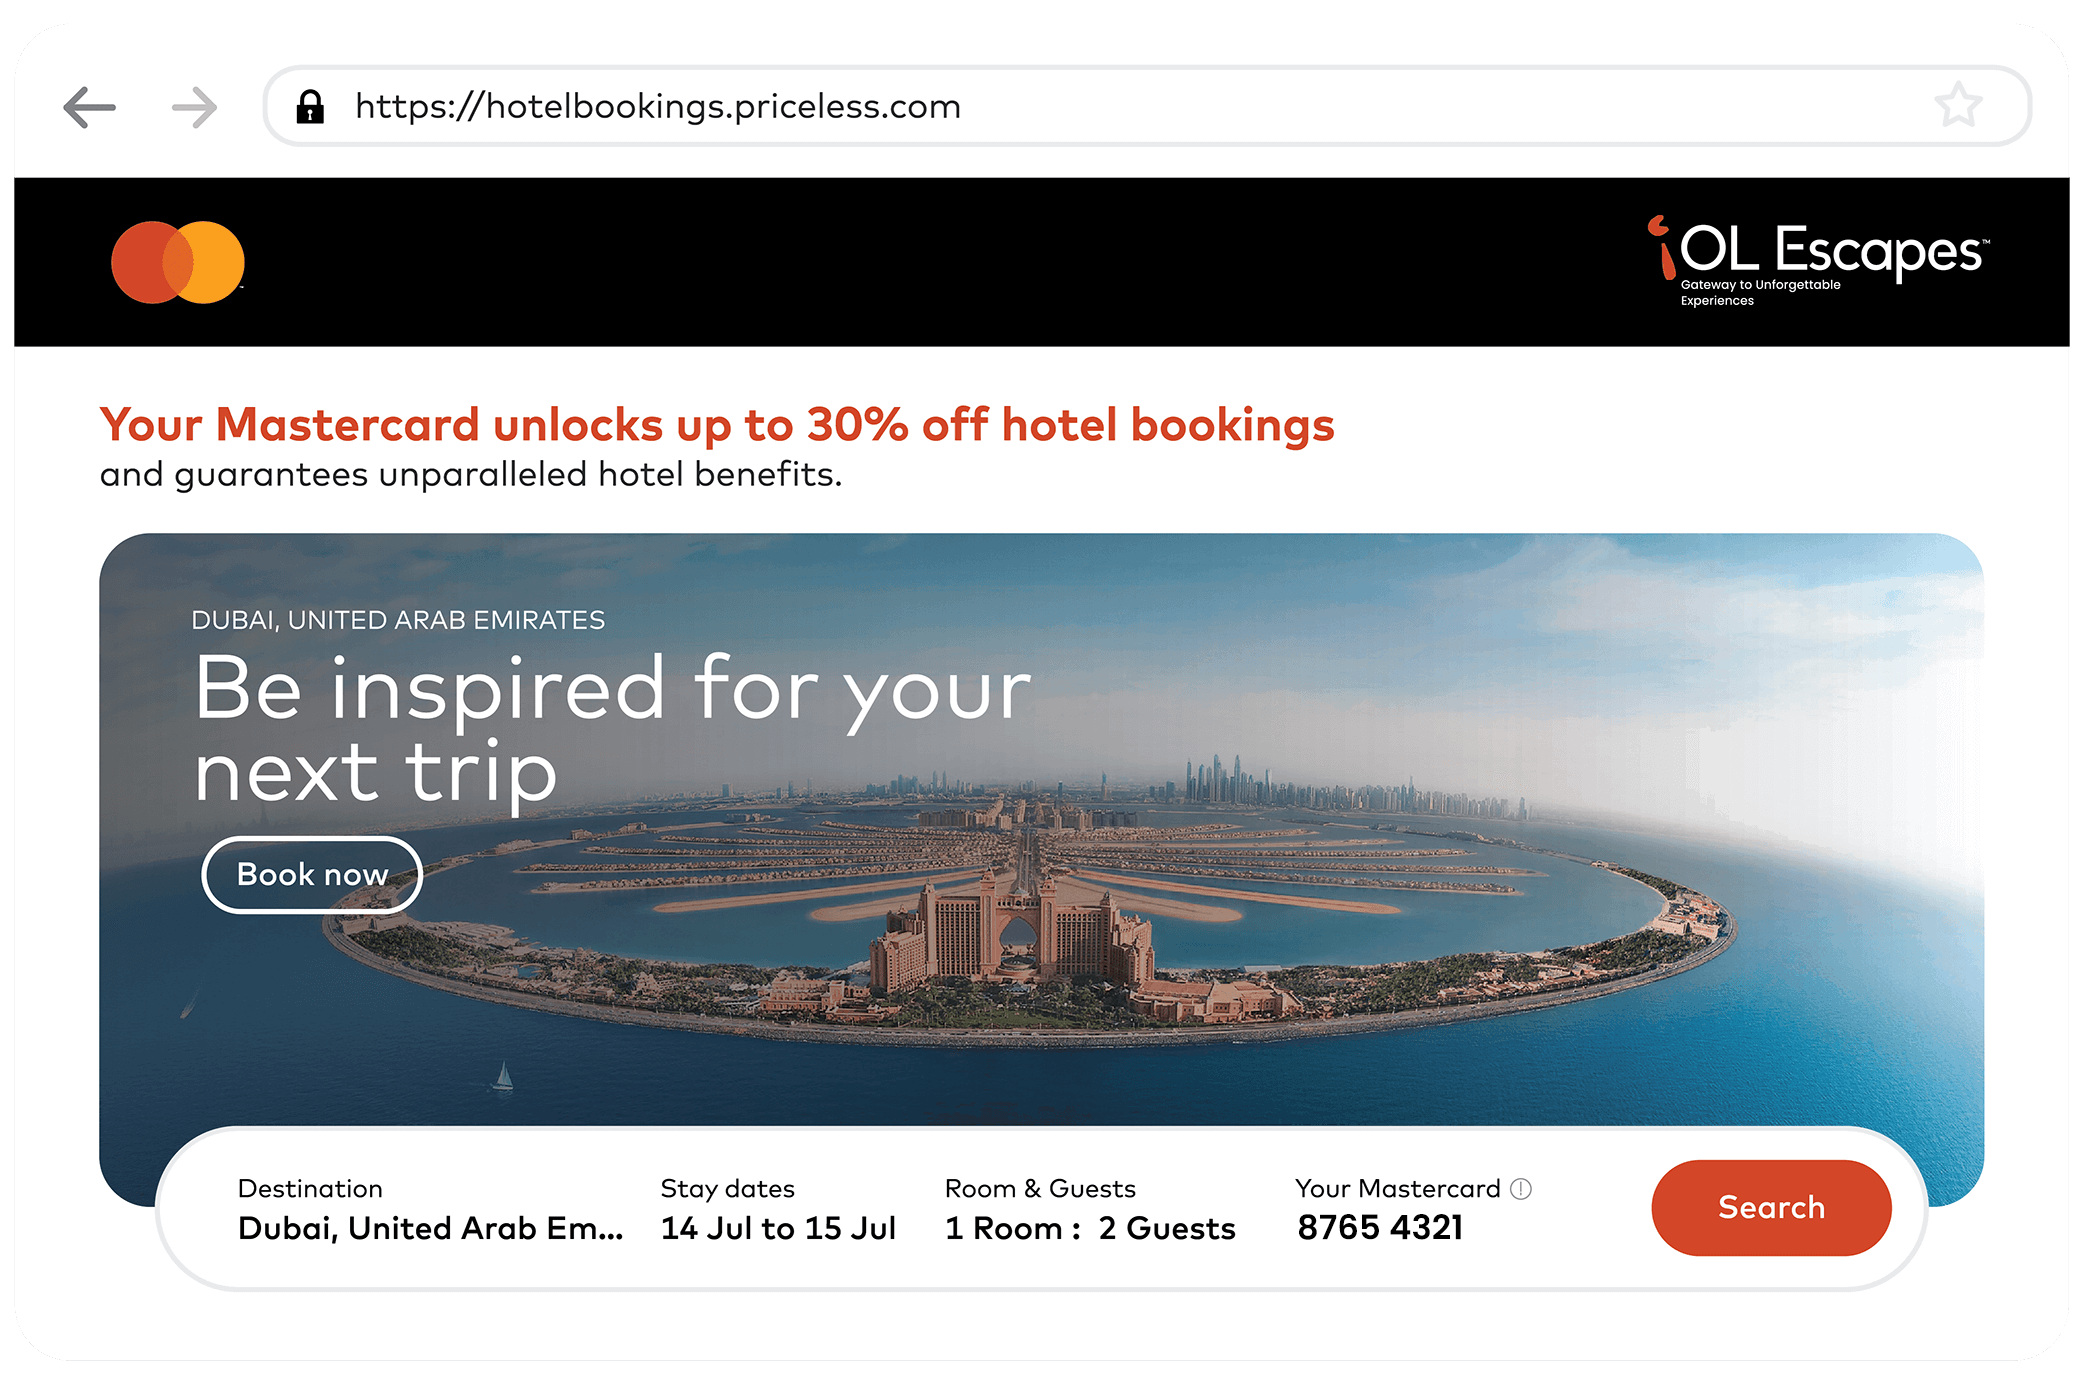 Mastercard Priceless Hotel Bookings - Serviced by iOL Escapes